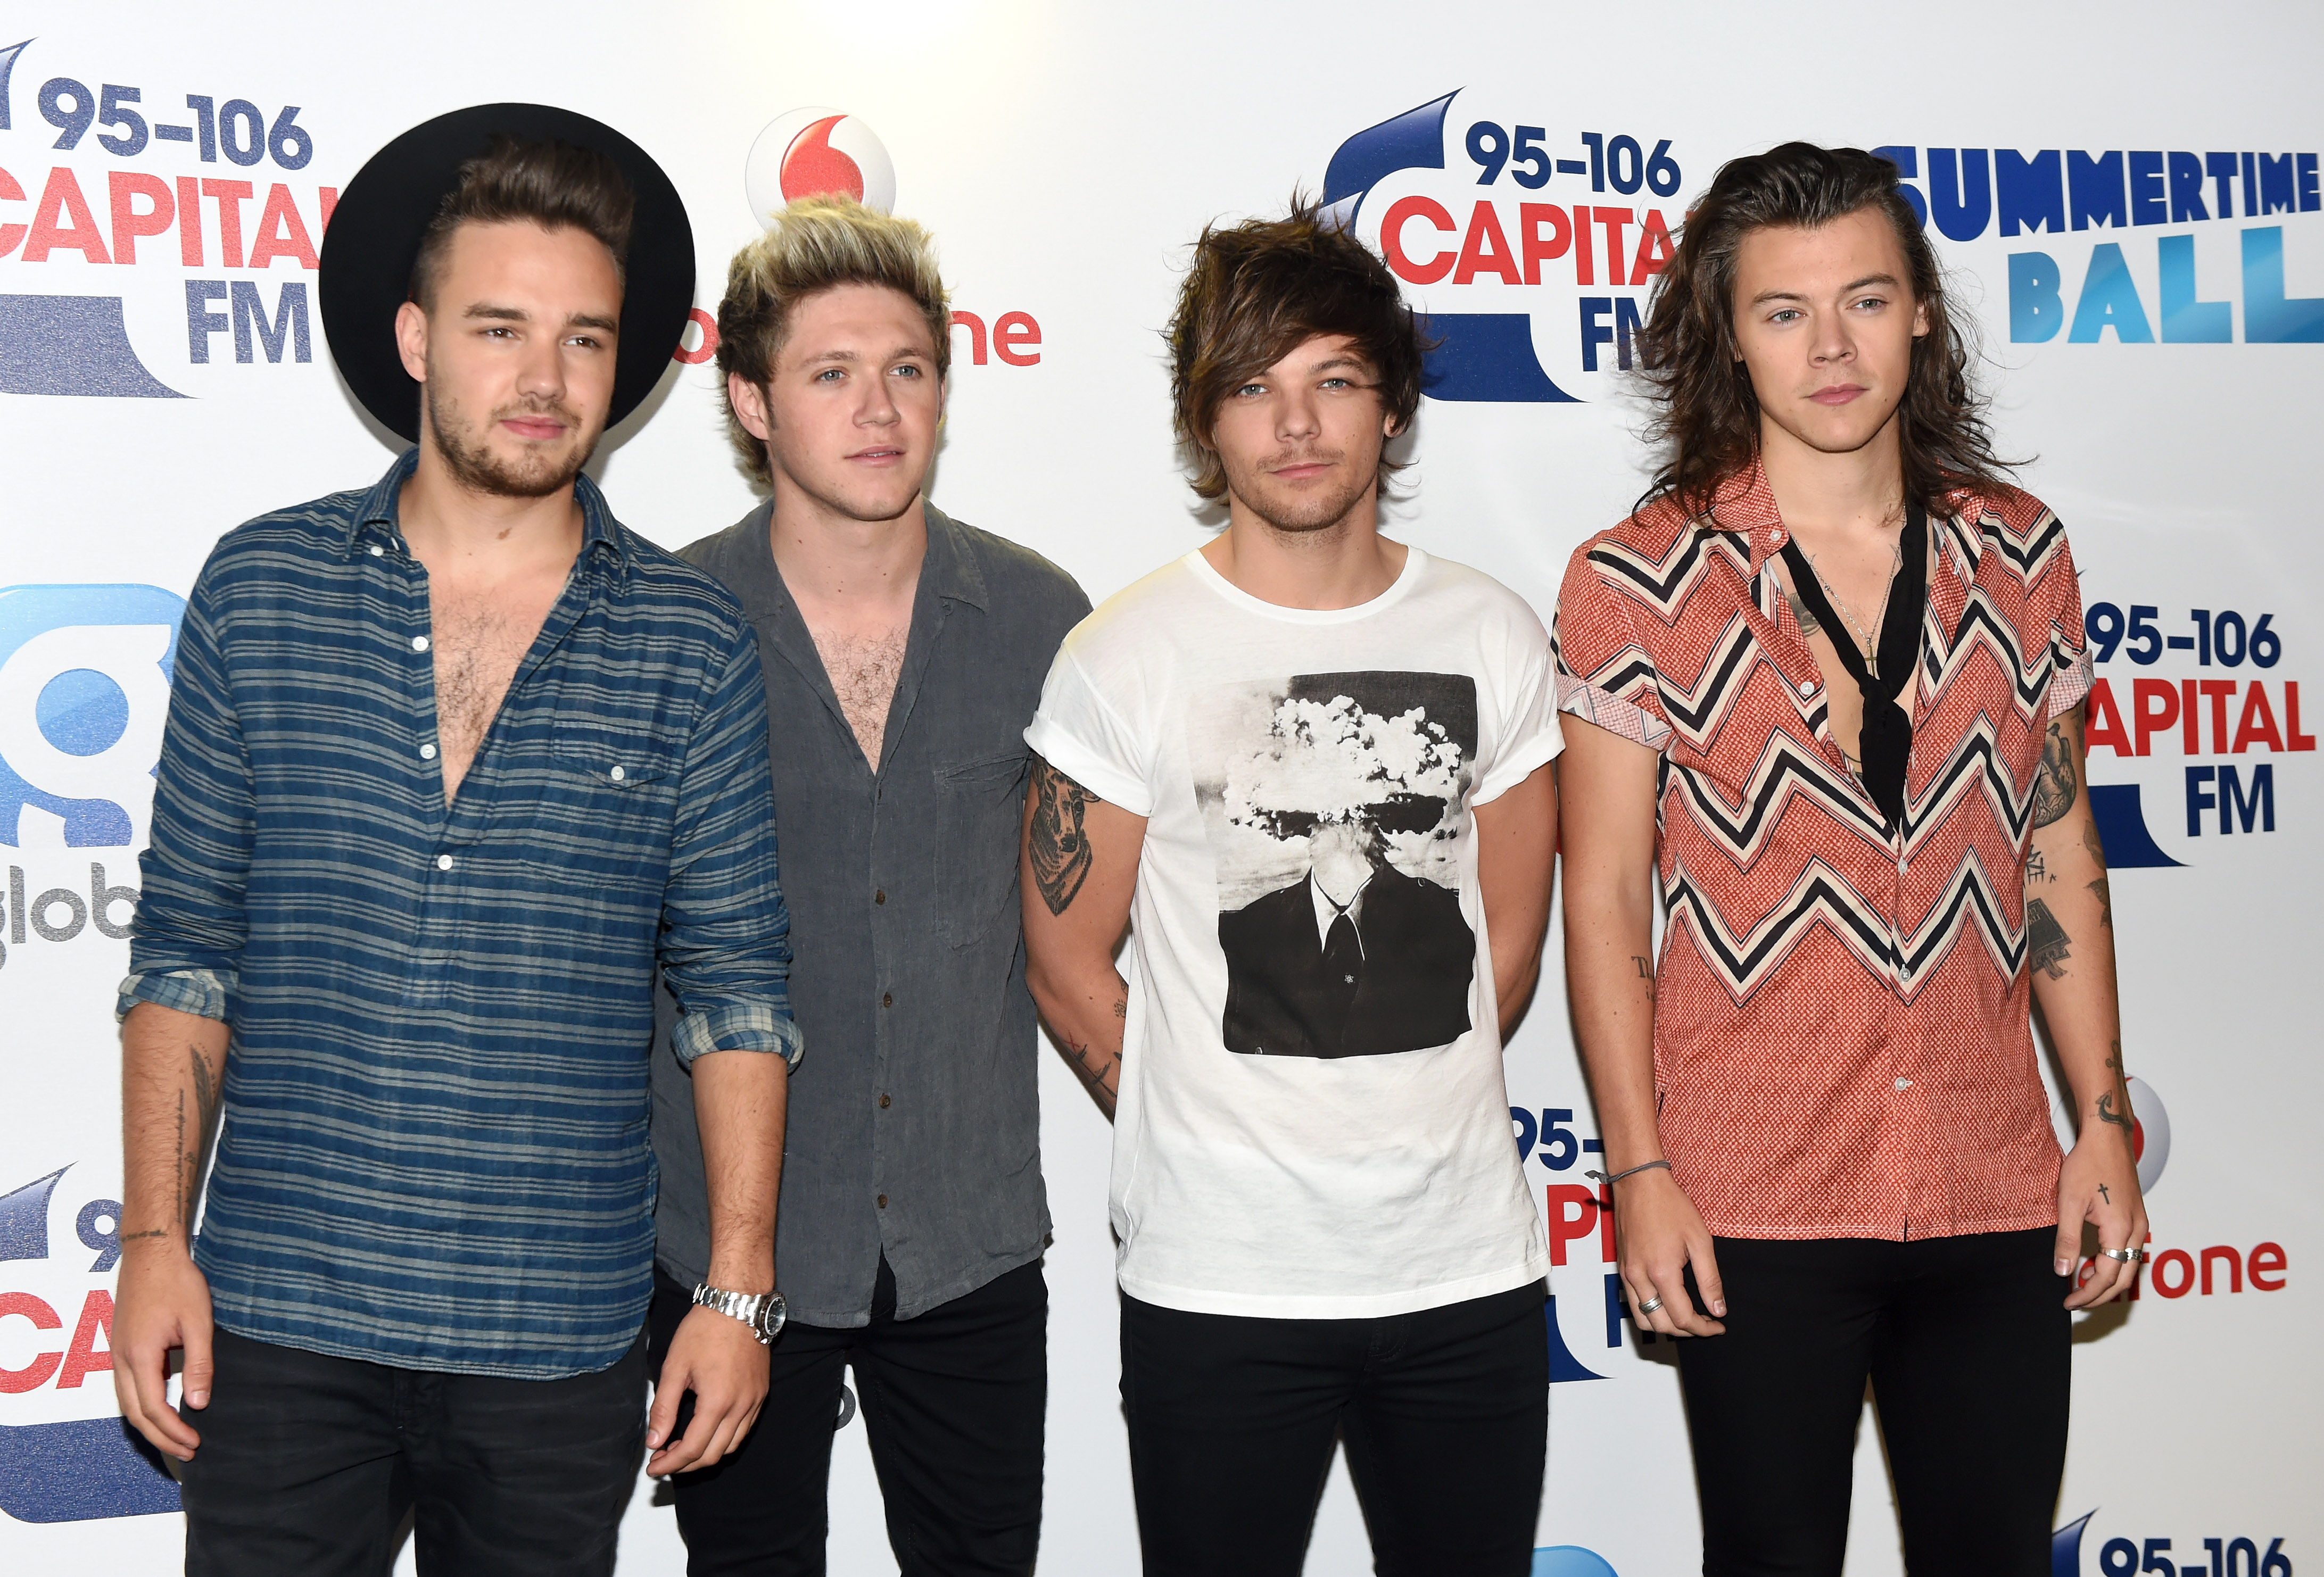 Liam Payne, Niall Horan, Louis Tomlinson and Harry Styles of One Direction attend the Capital FM Summertime Ball at Wembley Stadium on June 6, 2015 in London, England. (Karwai Tang&mdash;WireImage/Getty Images)